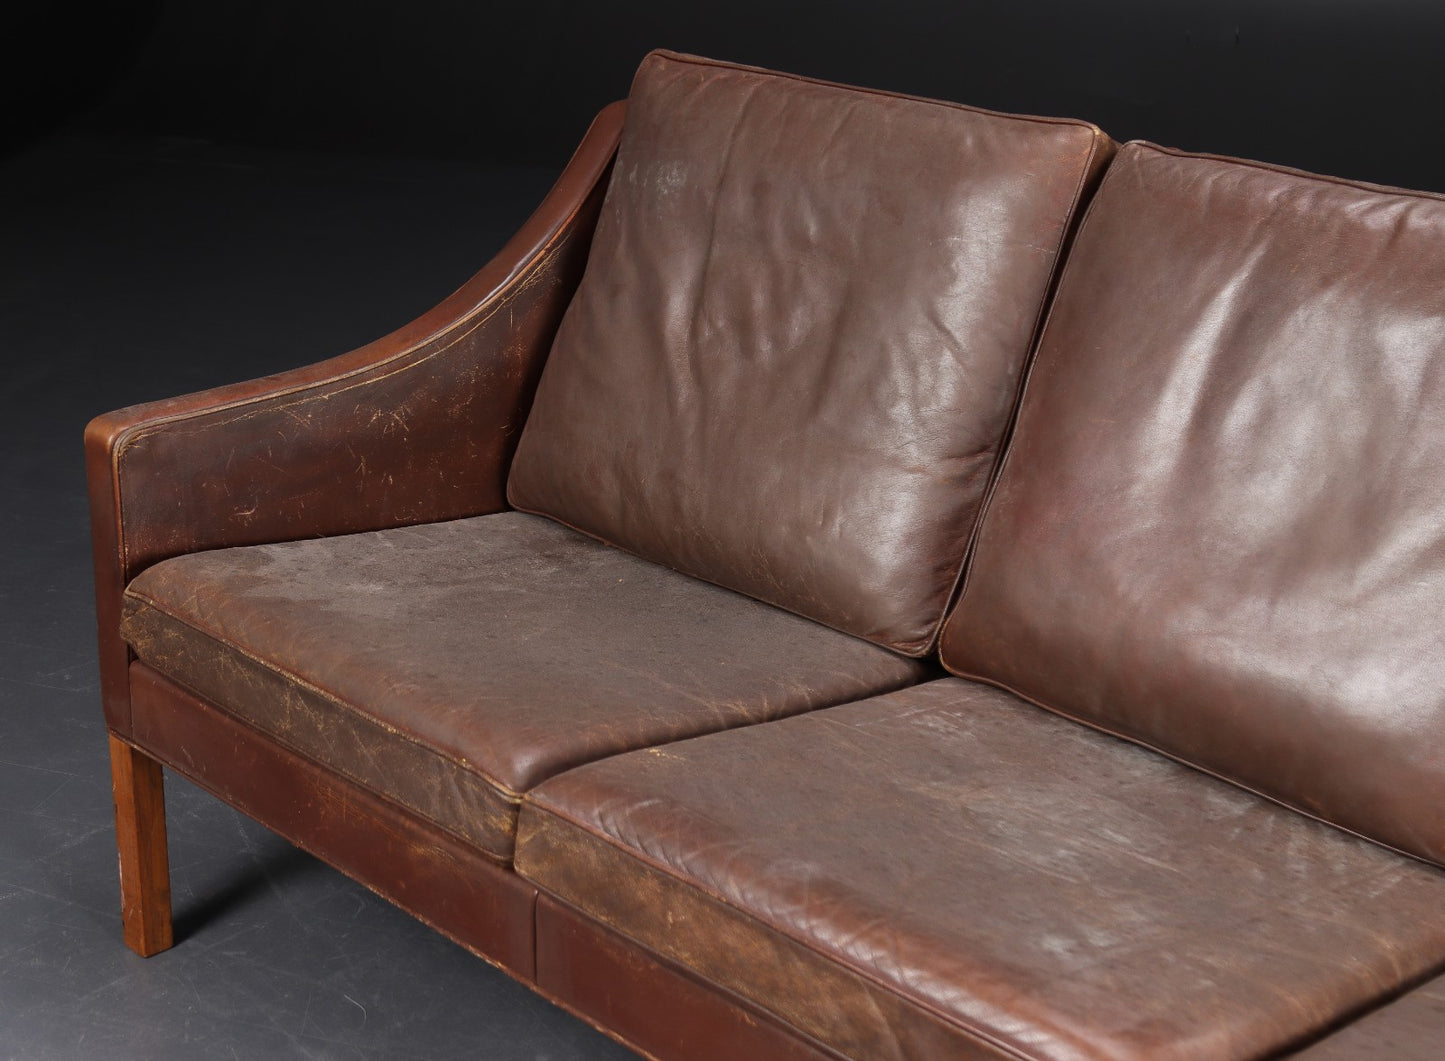 Børge Mogensen. Three-person sofa model 2209 in teak and leather. To be restored.